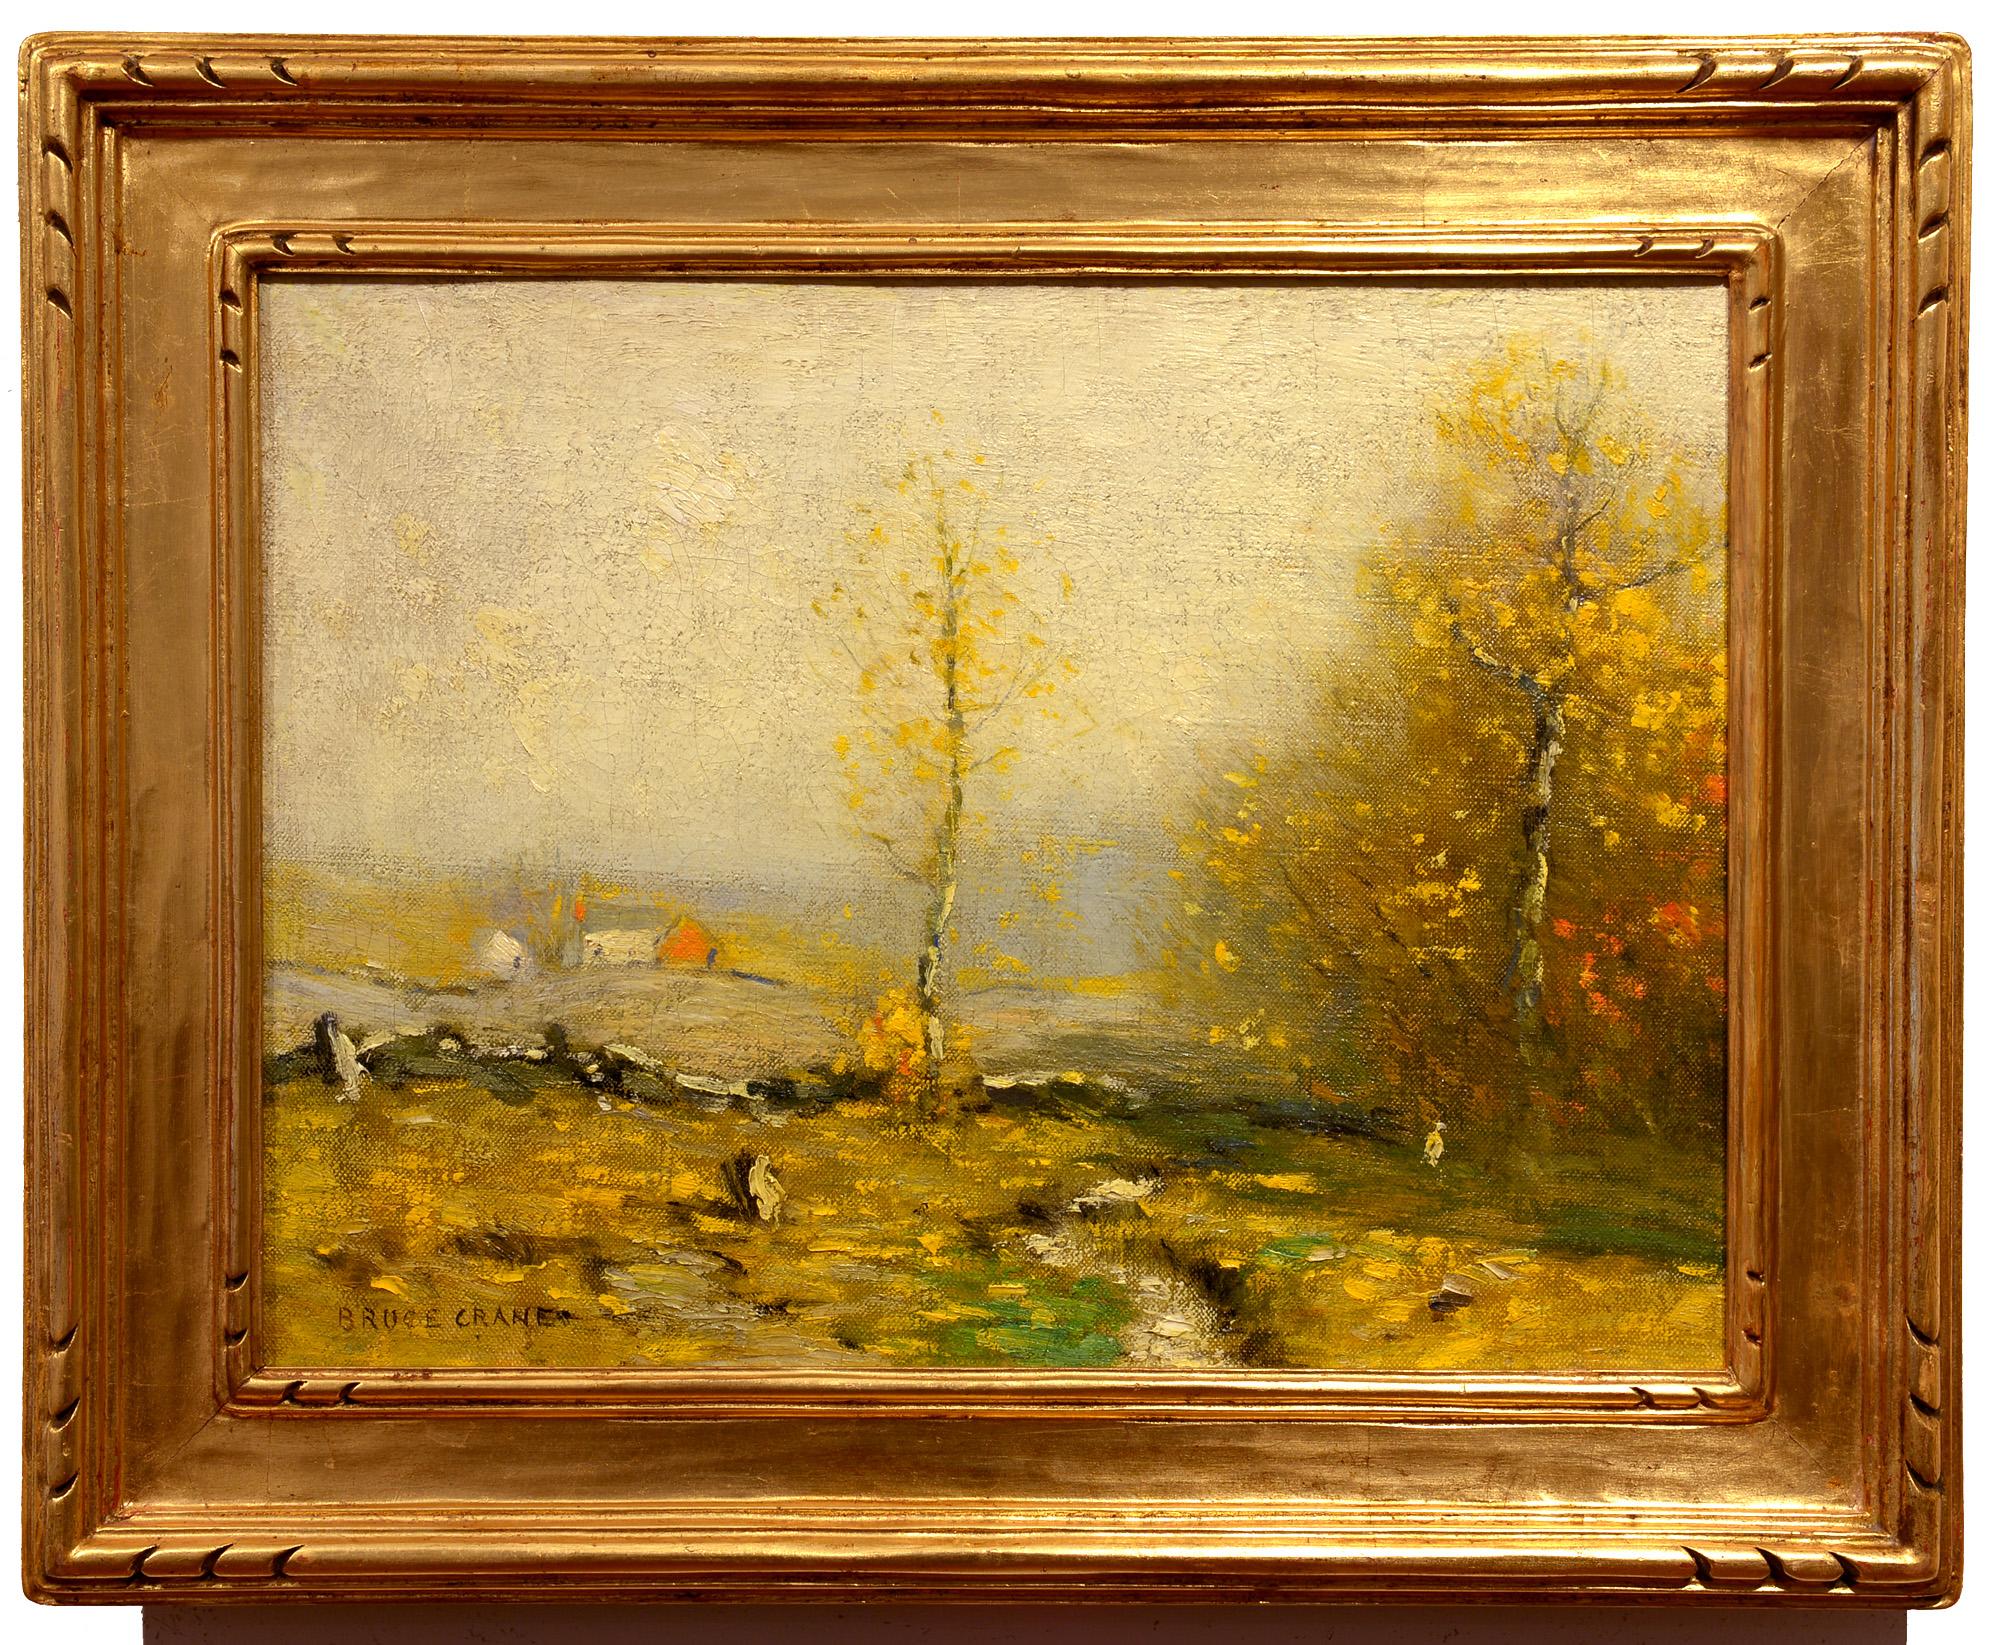 Homestead in Autumn - Painting by Bruce Crane